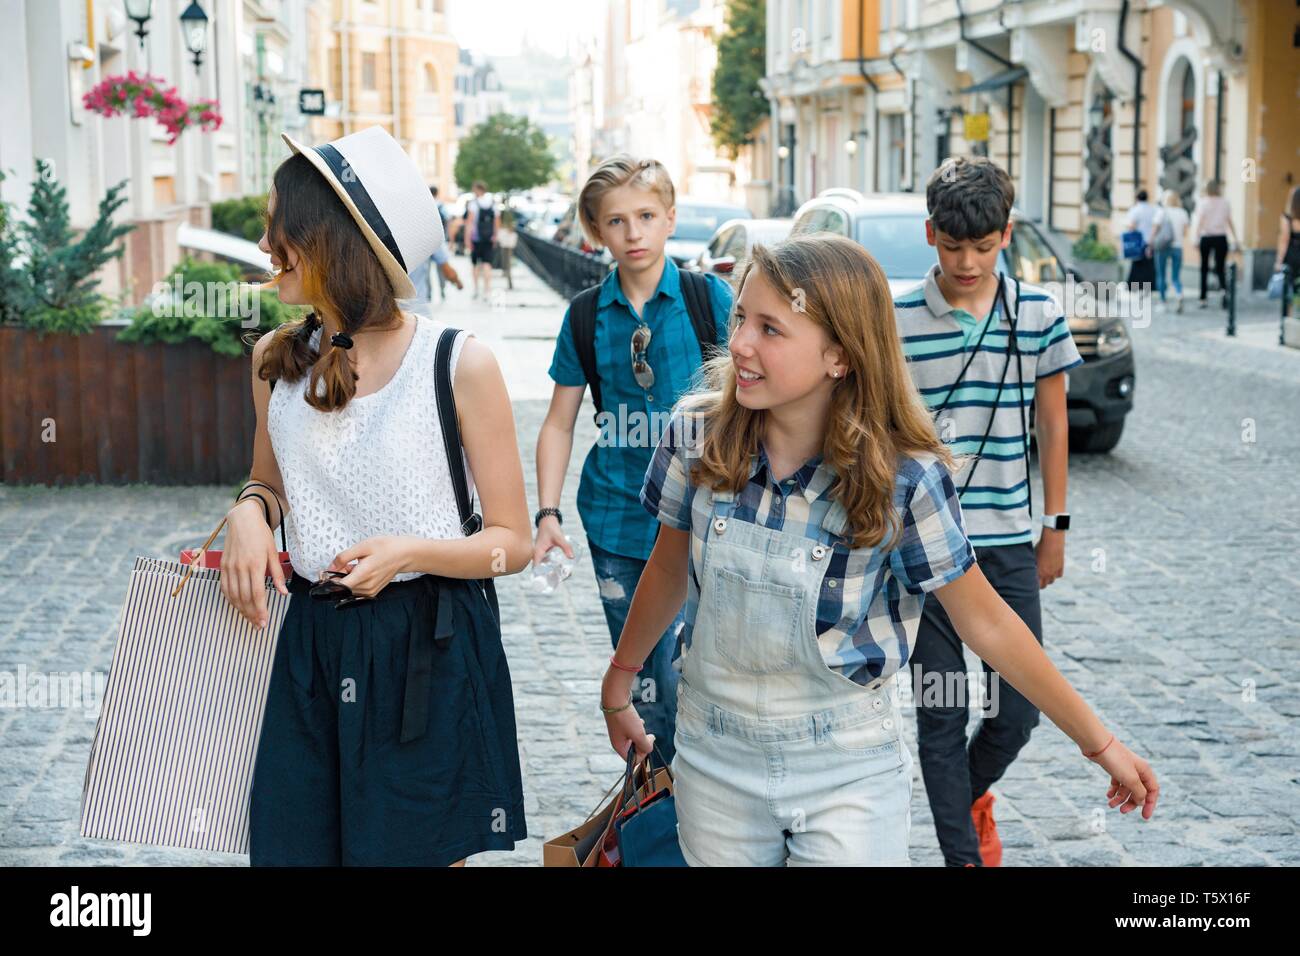 Group of teenagers with shopping bags on city street Stock Photo